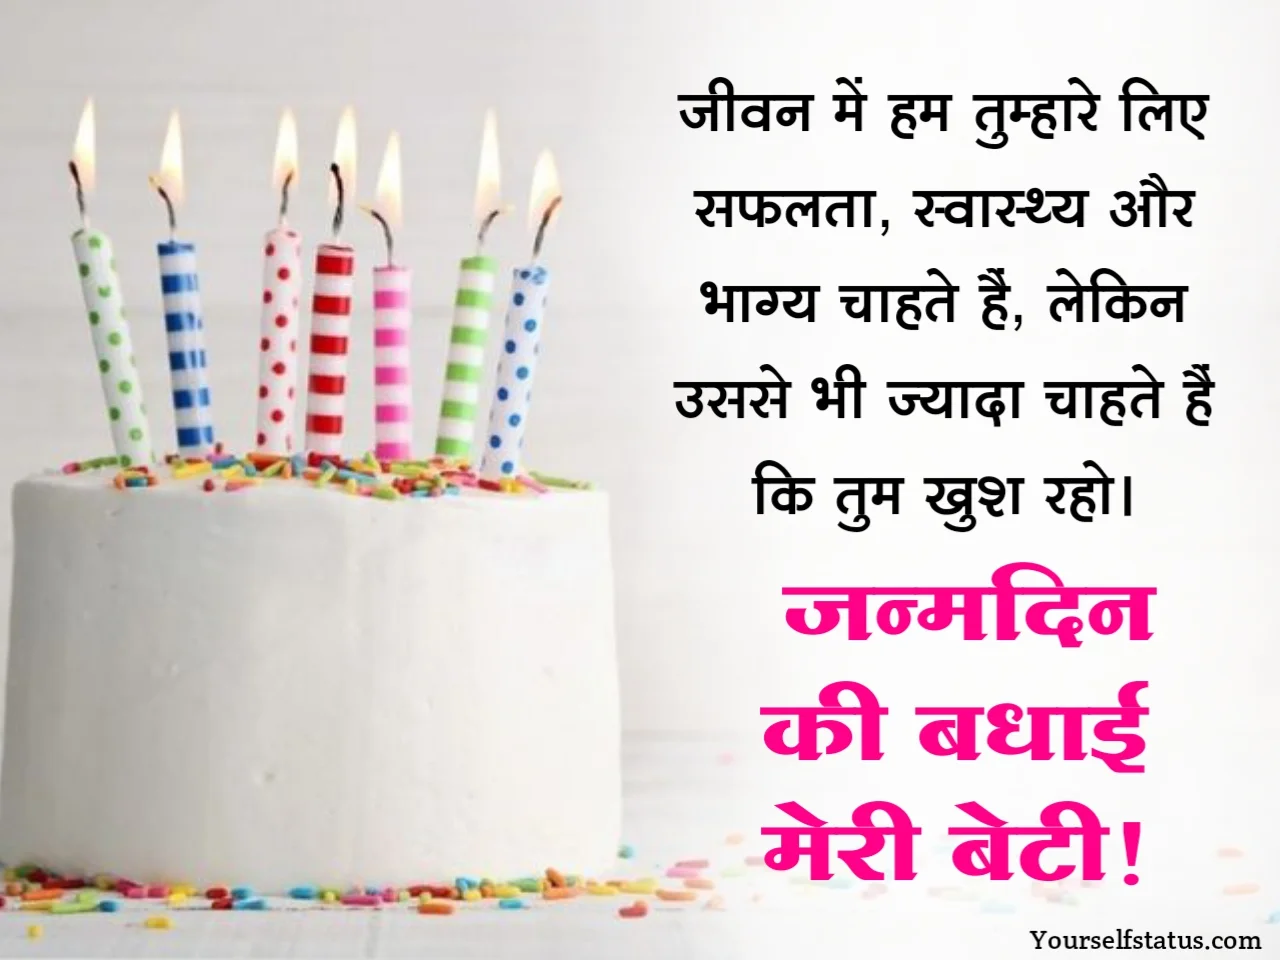 Happy birthday wishes for daughter in hindi